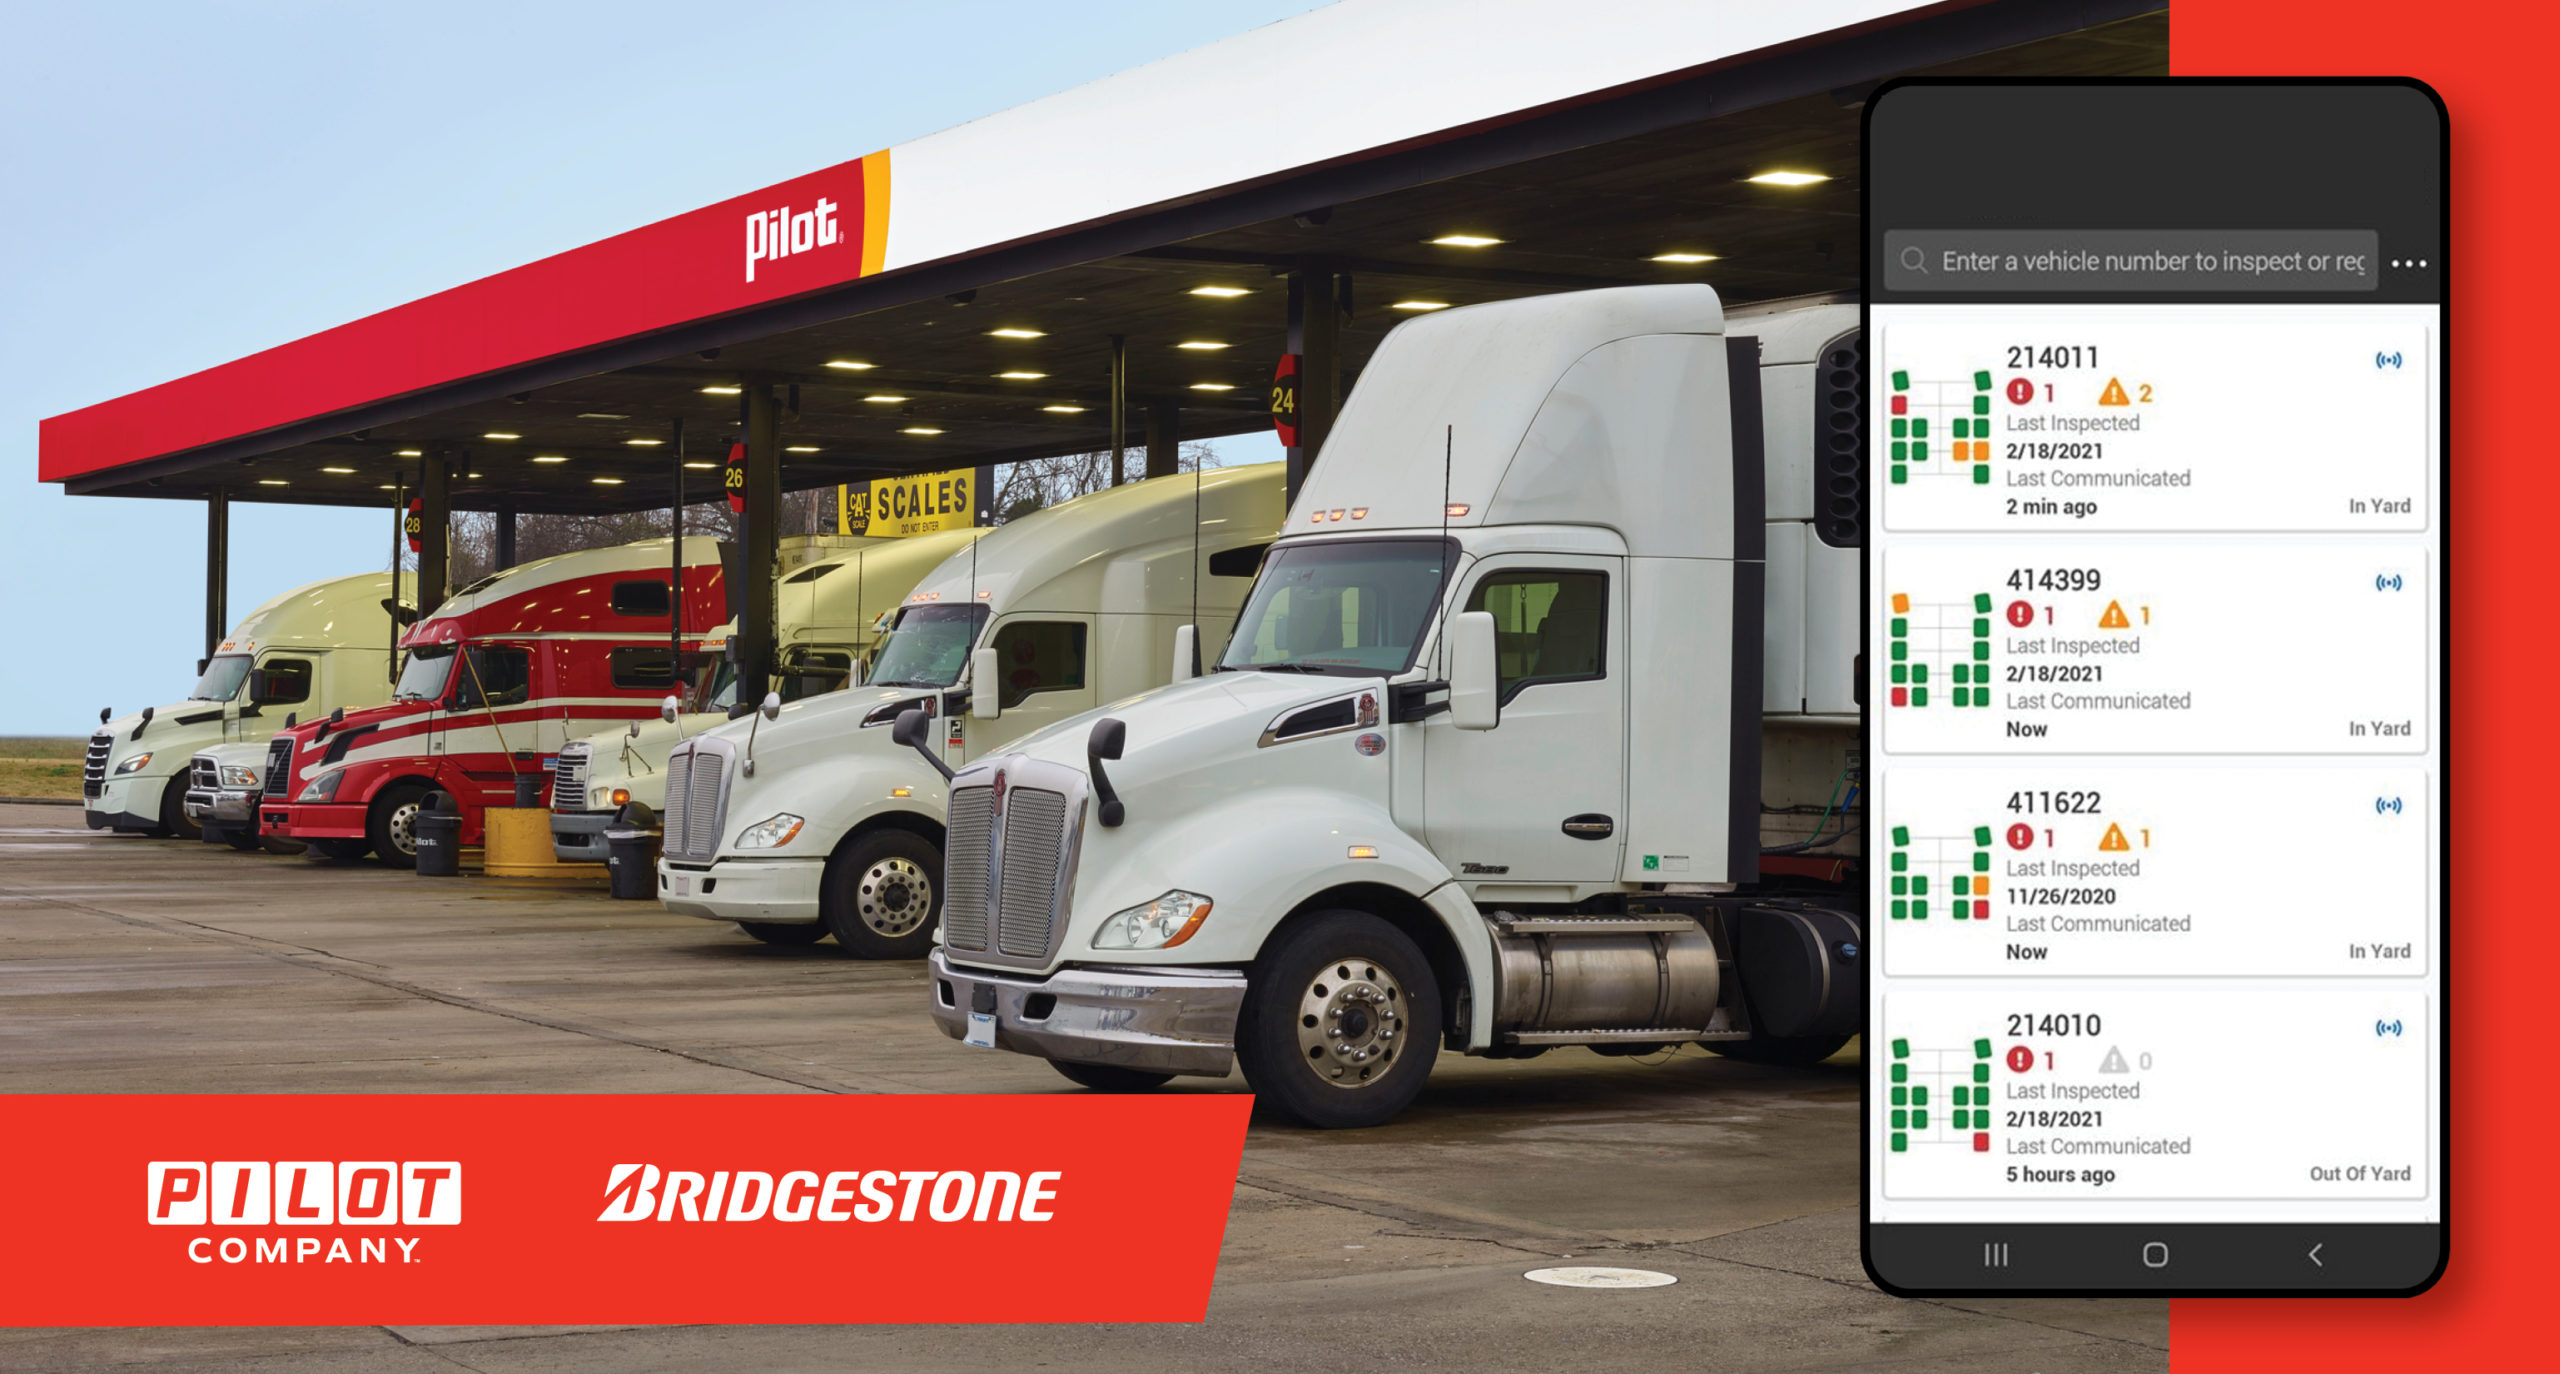 Featured image for “Pilot Company and Bridgestone launch national fleet tire monitoring and service network after testing technology in Knoxville”